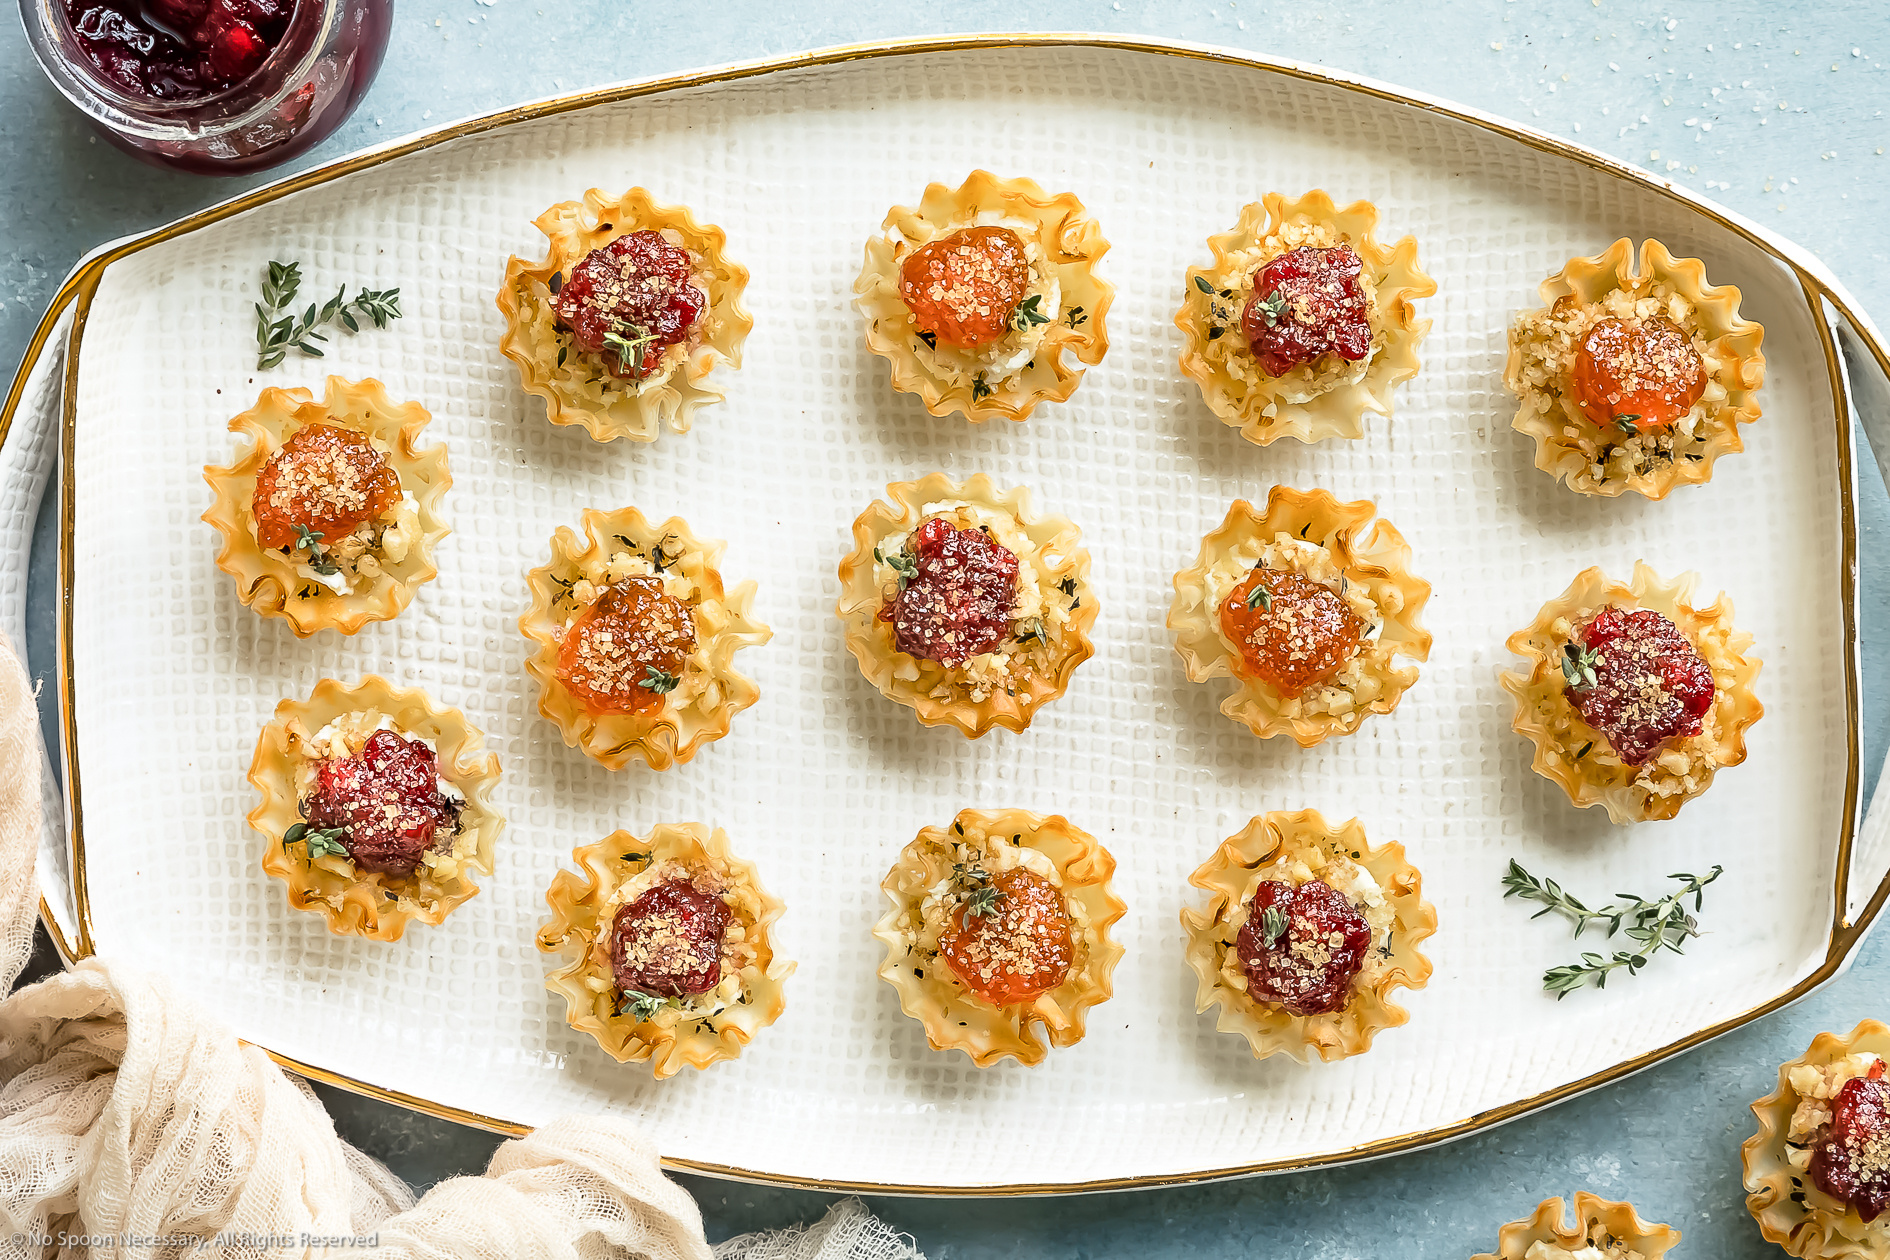 https://www.nospoonnecessary.com/wp-content/uploads/2019/10/Goat-Cheese-Phyllo-Cups-64.jpg